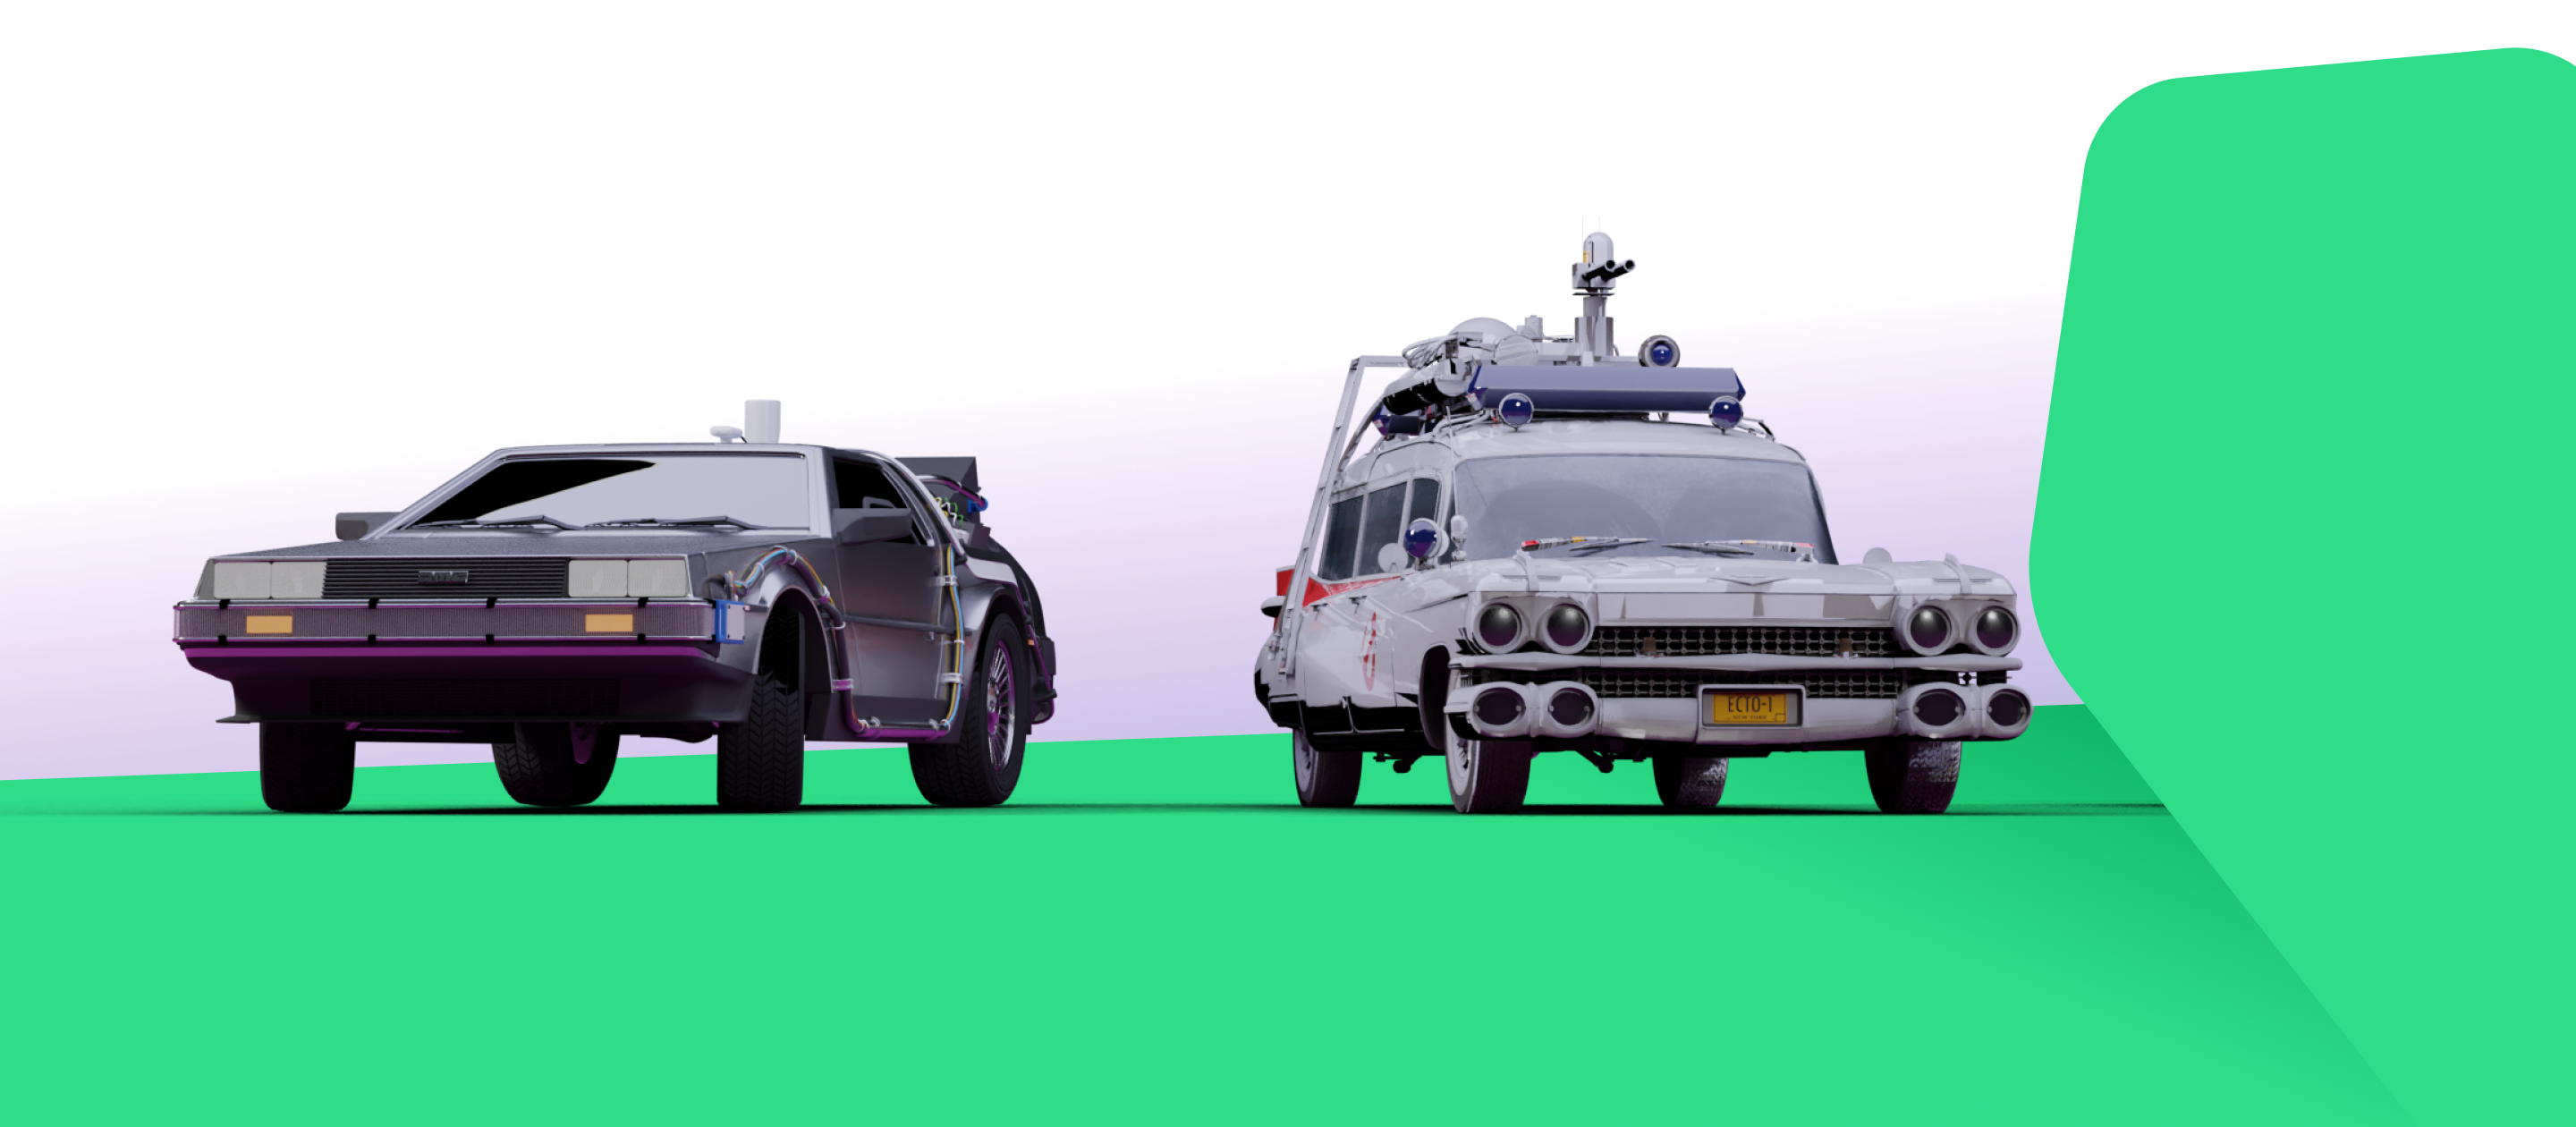 3D rendering of the back to the future car and ghost busters car